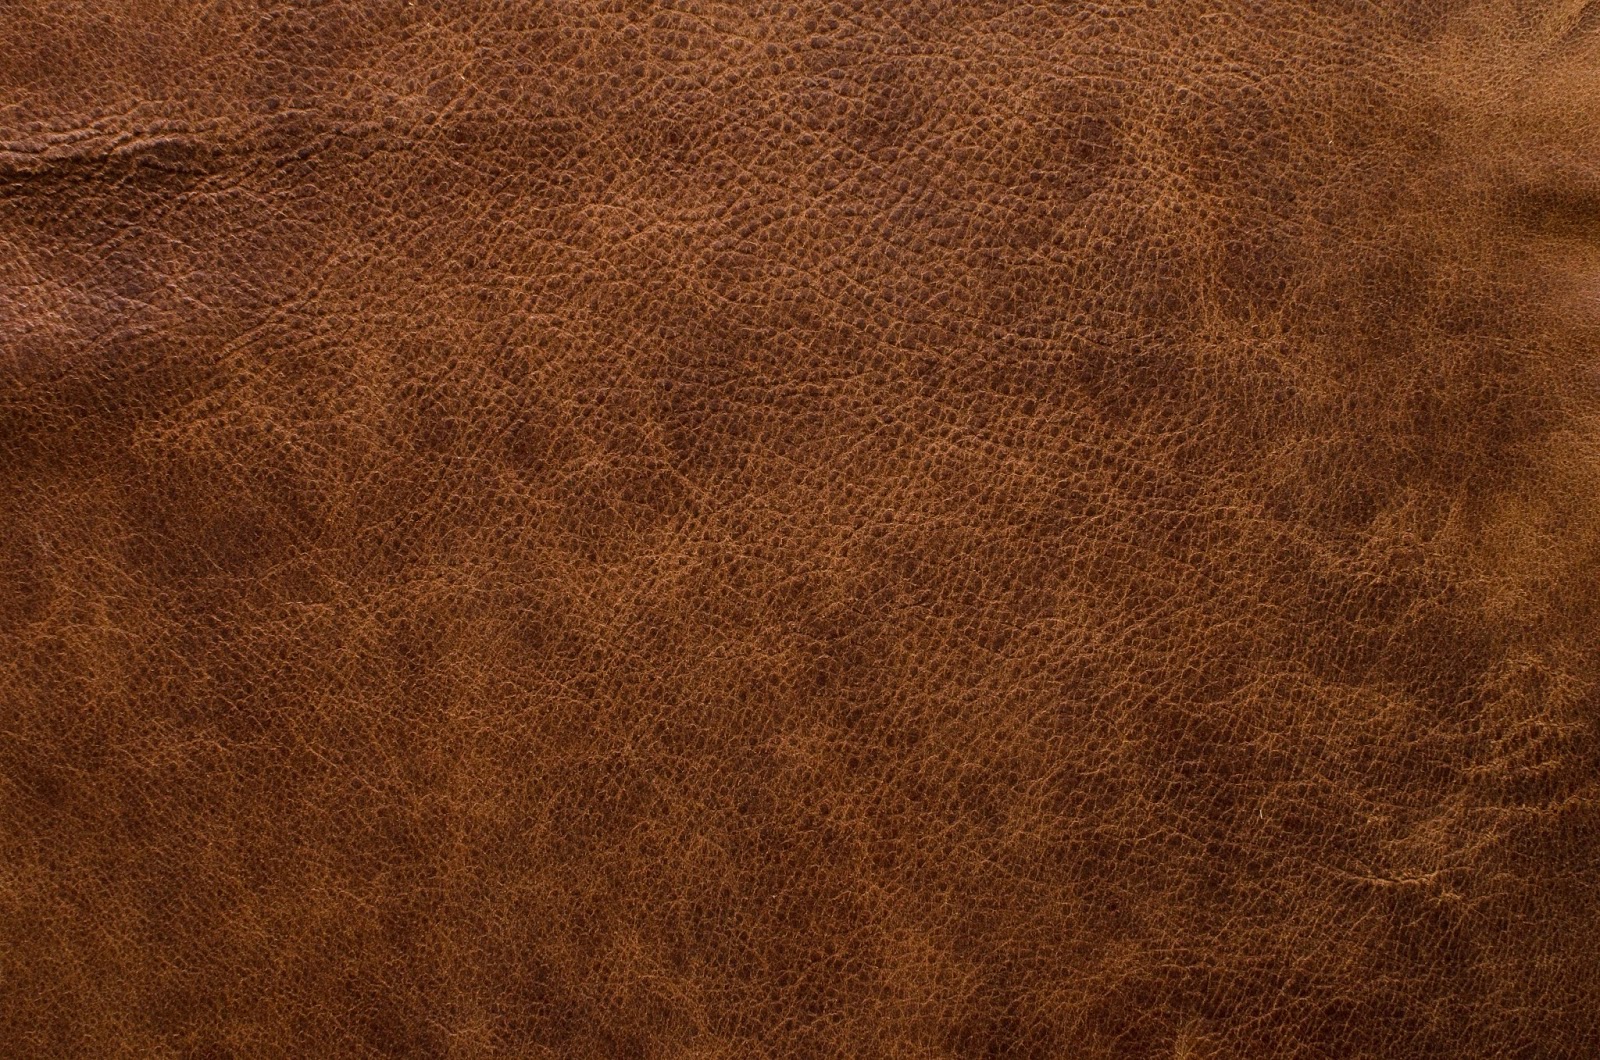 Mens Distressed Brown Leather Jacket Wallpaper HD